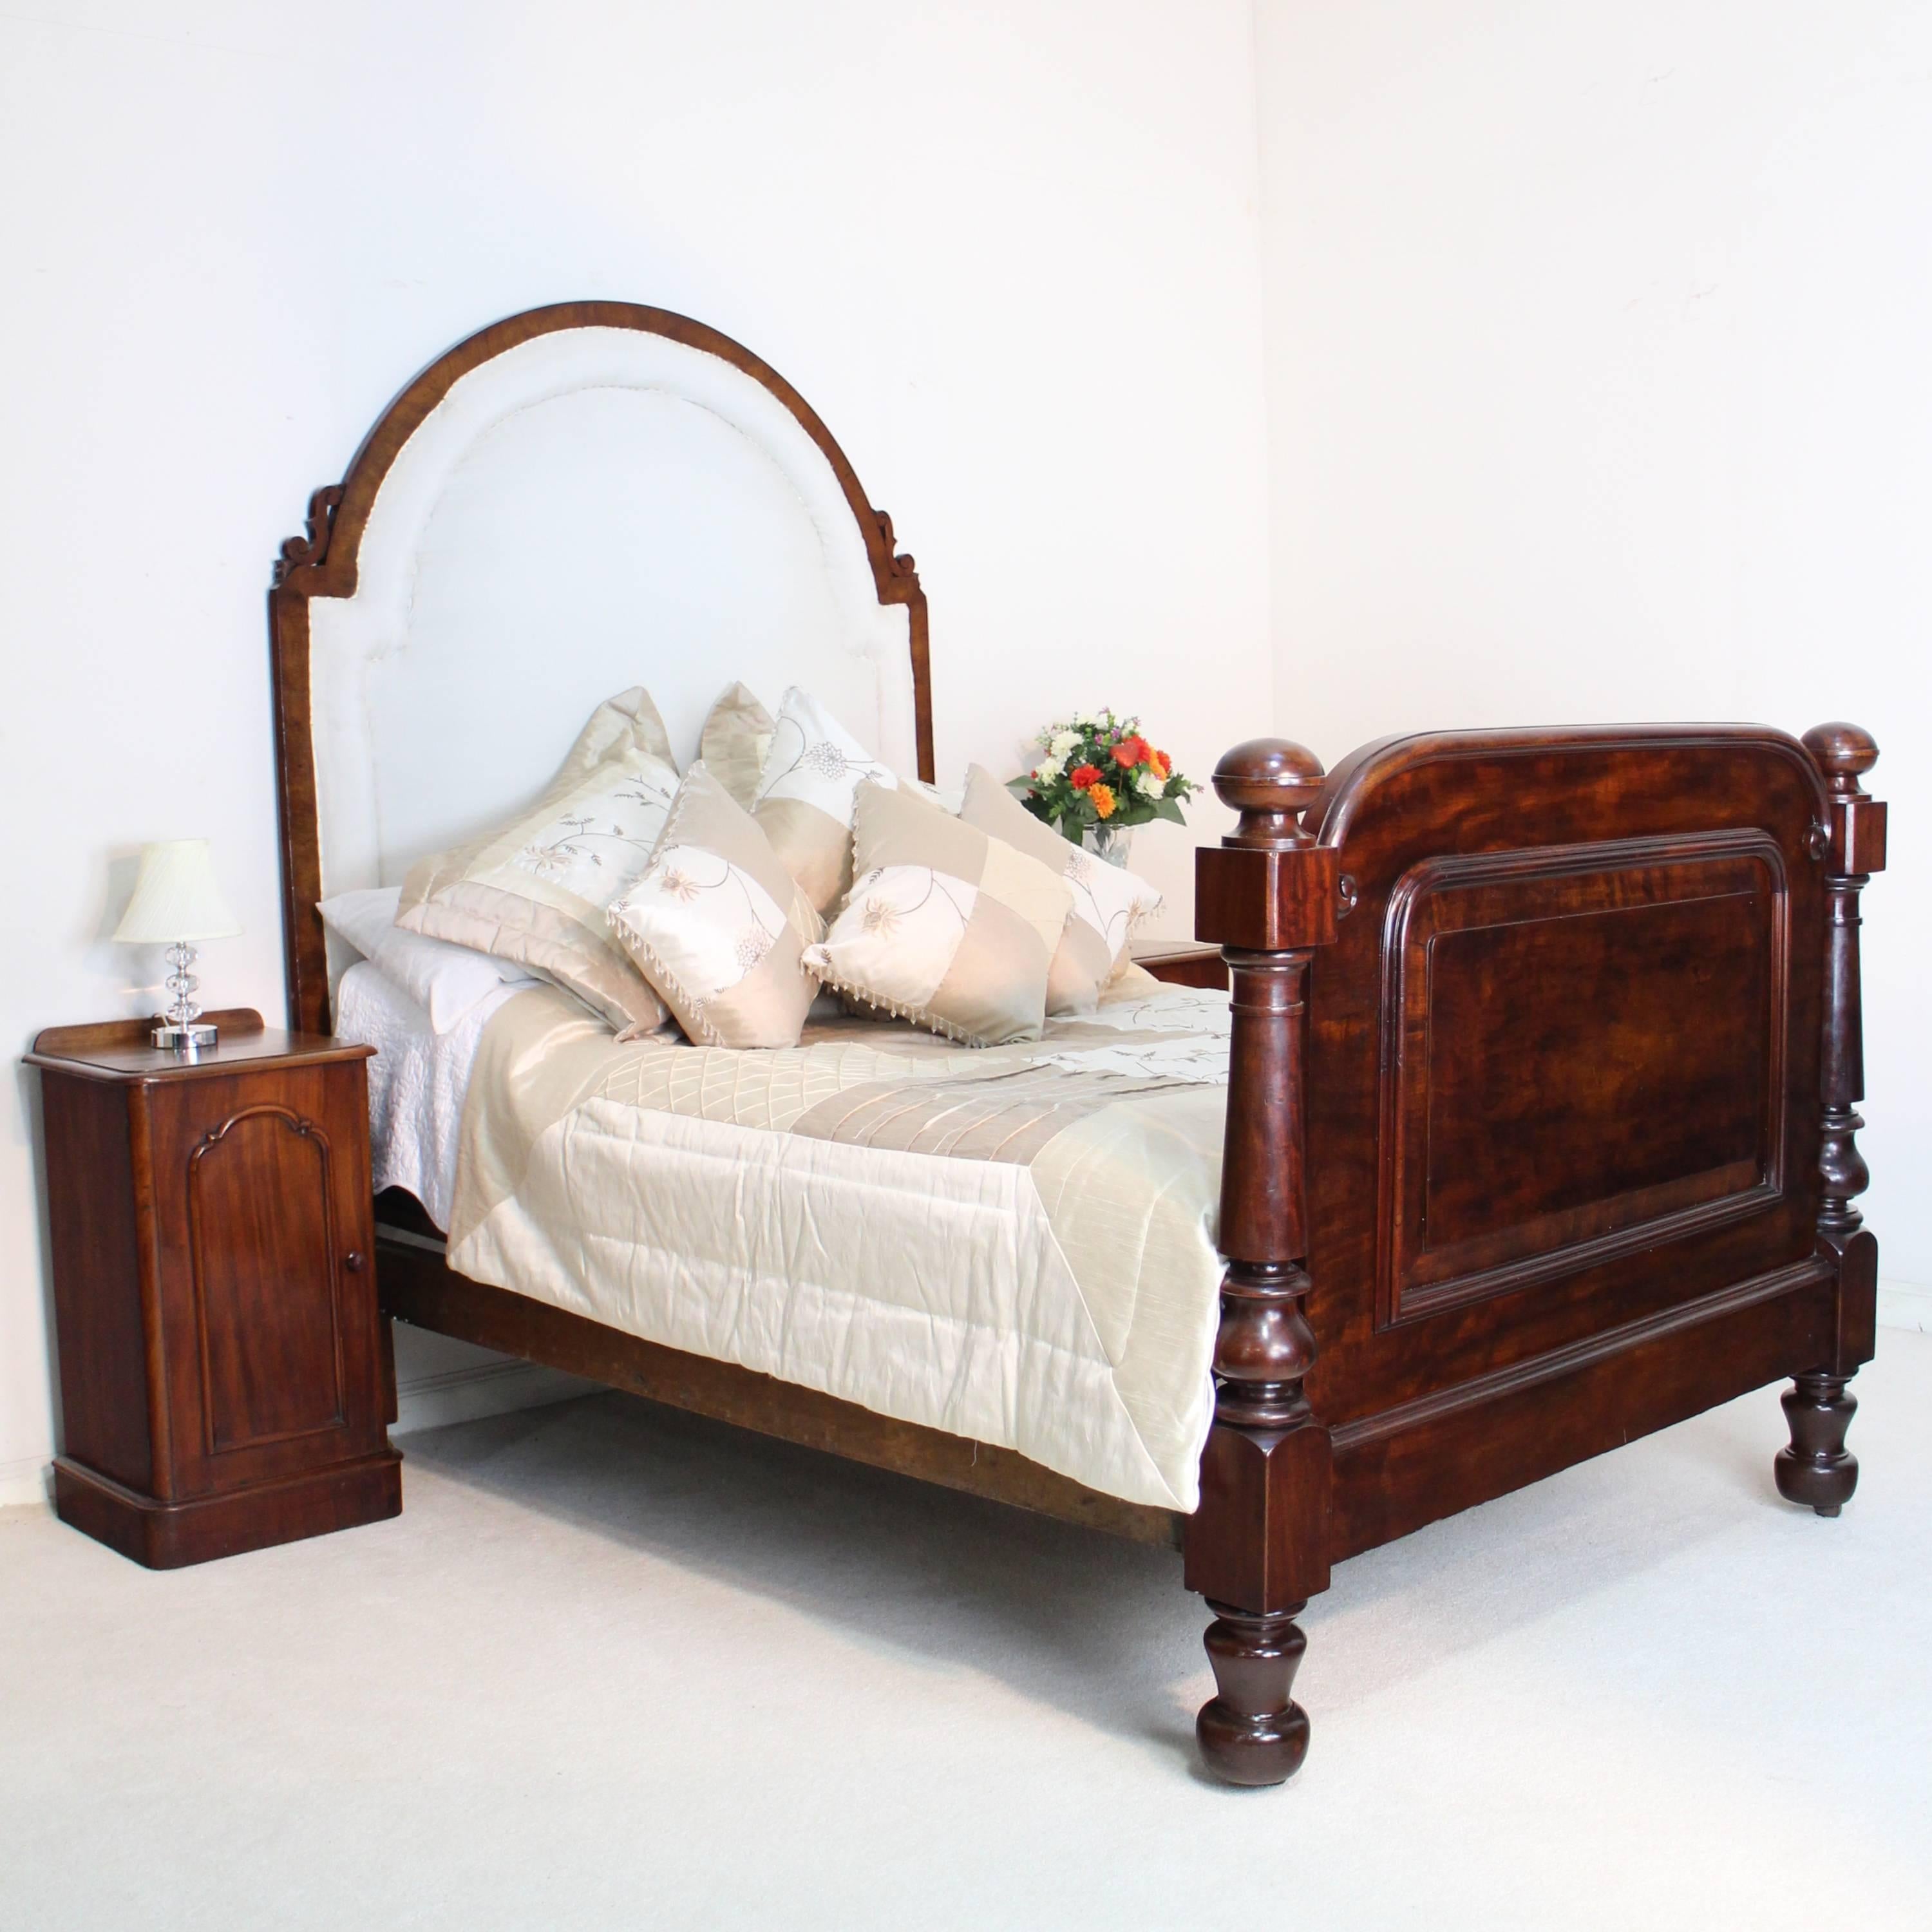 A handsome Scottish Victorian mahogany and upholstered double bed frame with a tall arched and padded headboard with carved s-scrolls. The footboard features large block and turned columns on bulbous feet with hidden castors and a beautifully